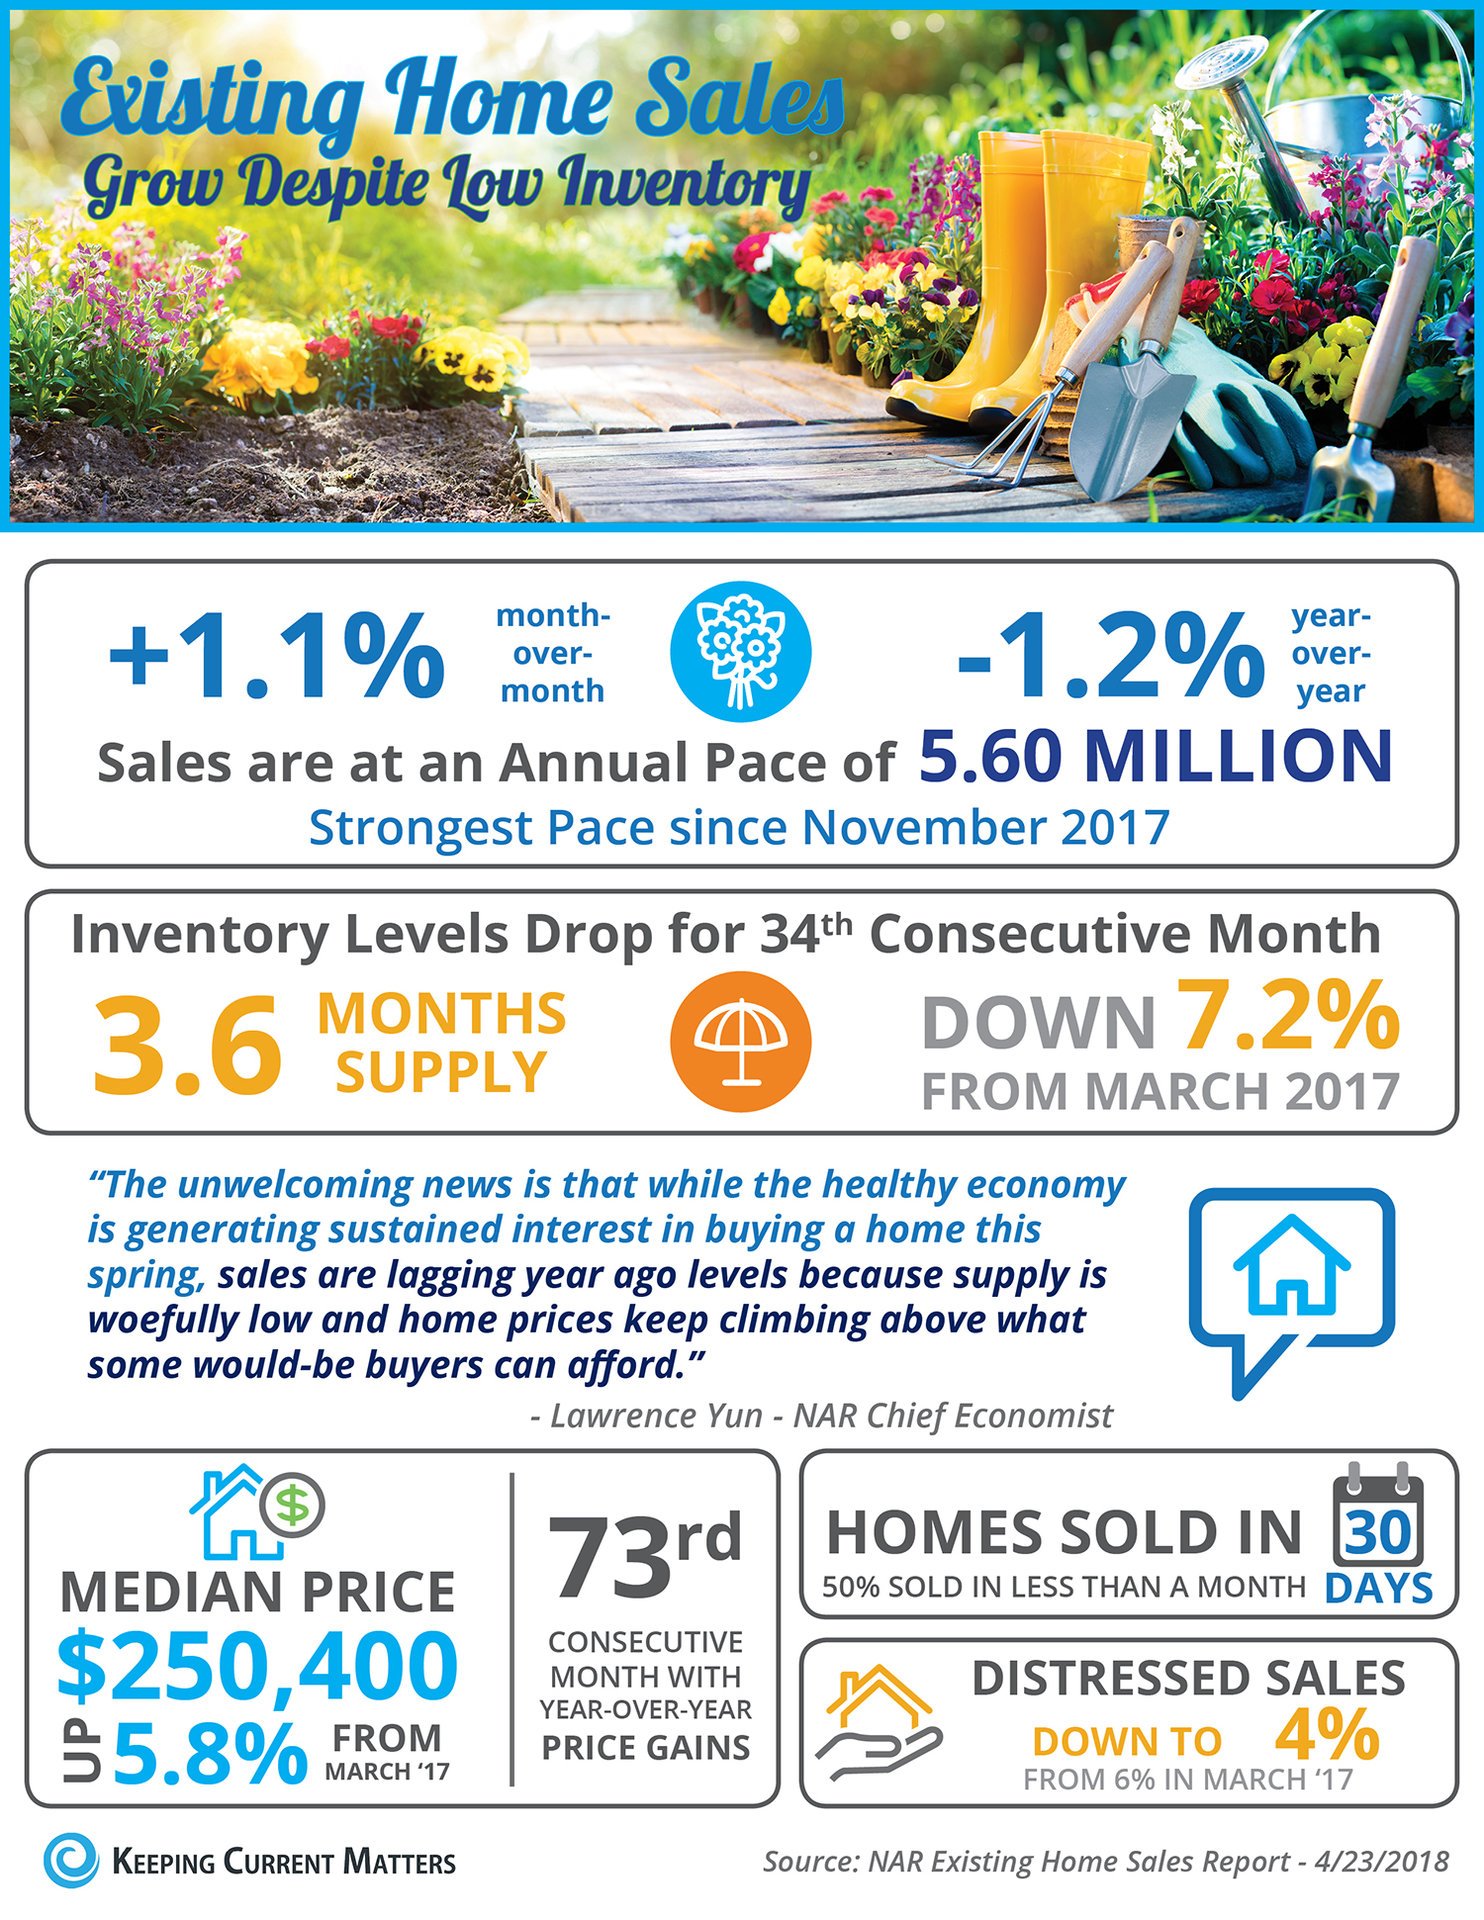 Existing Home Sales Grow Despite Low Inventory [INFOGRAPHIC] | Keeping Current Matters